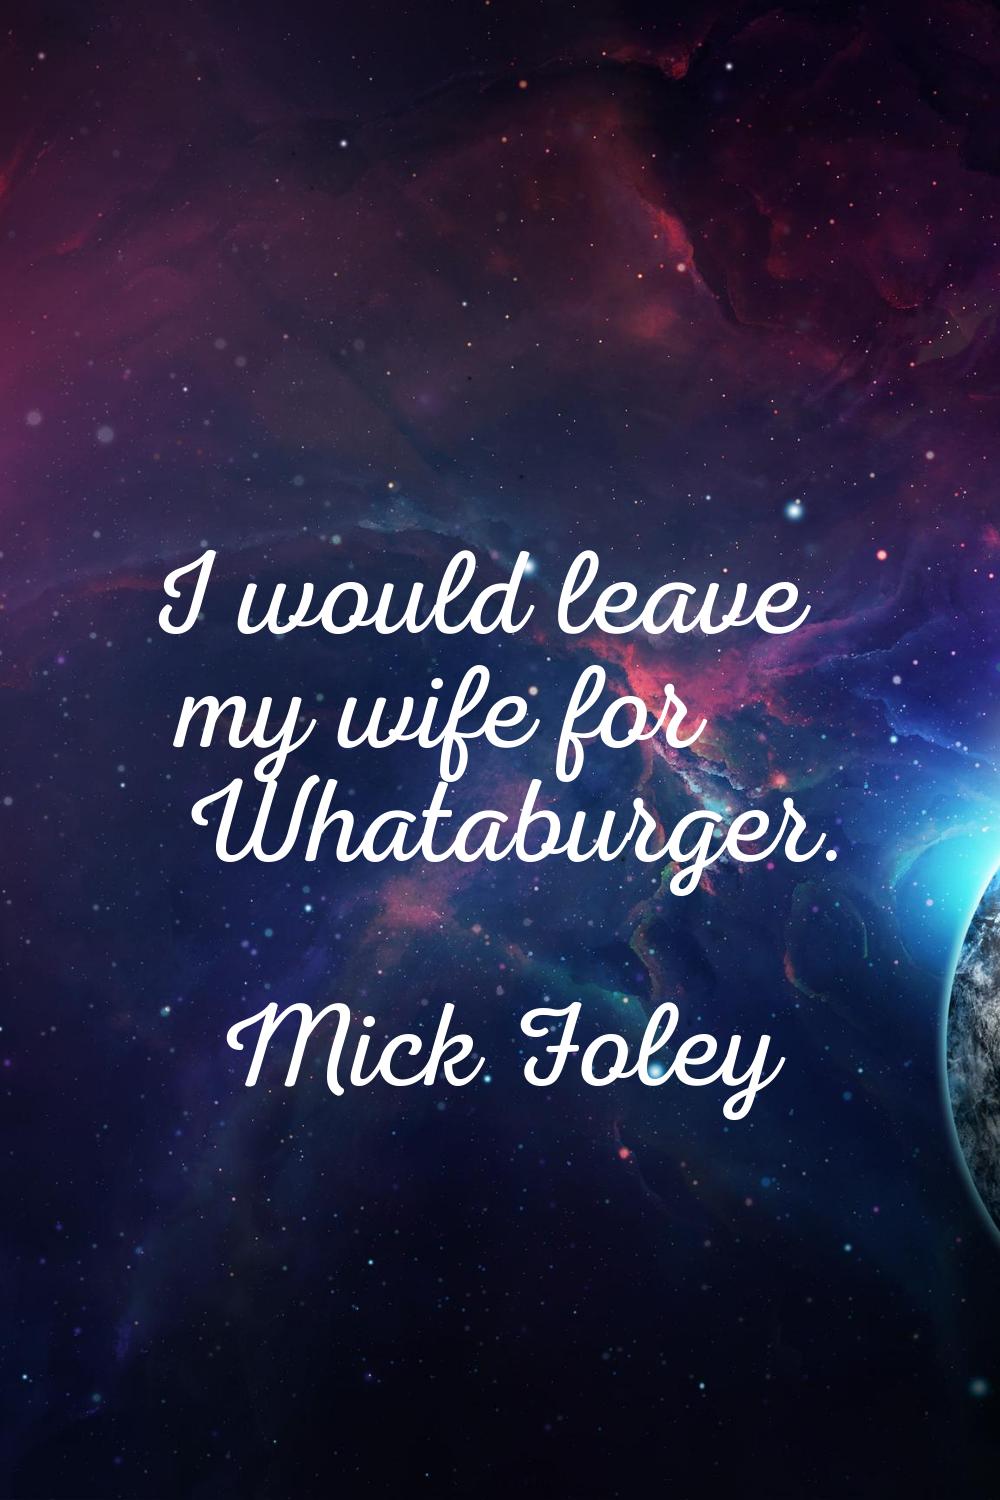 I would leave my wife for Whataburger.